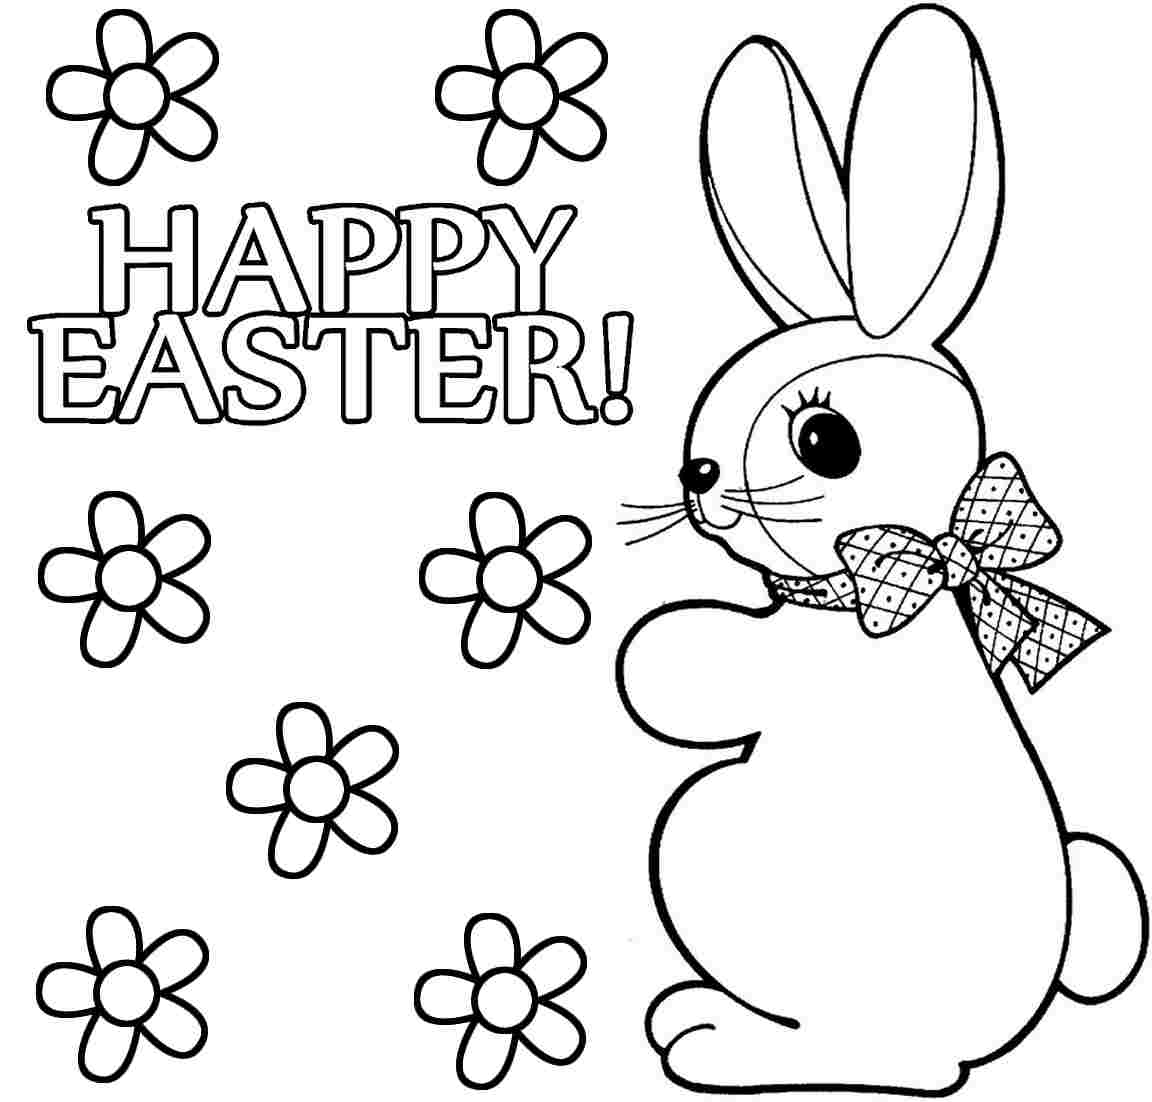 Cute Easter Bunny Coloring Sheets | Coloring Online